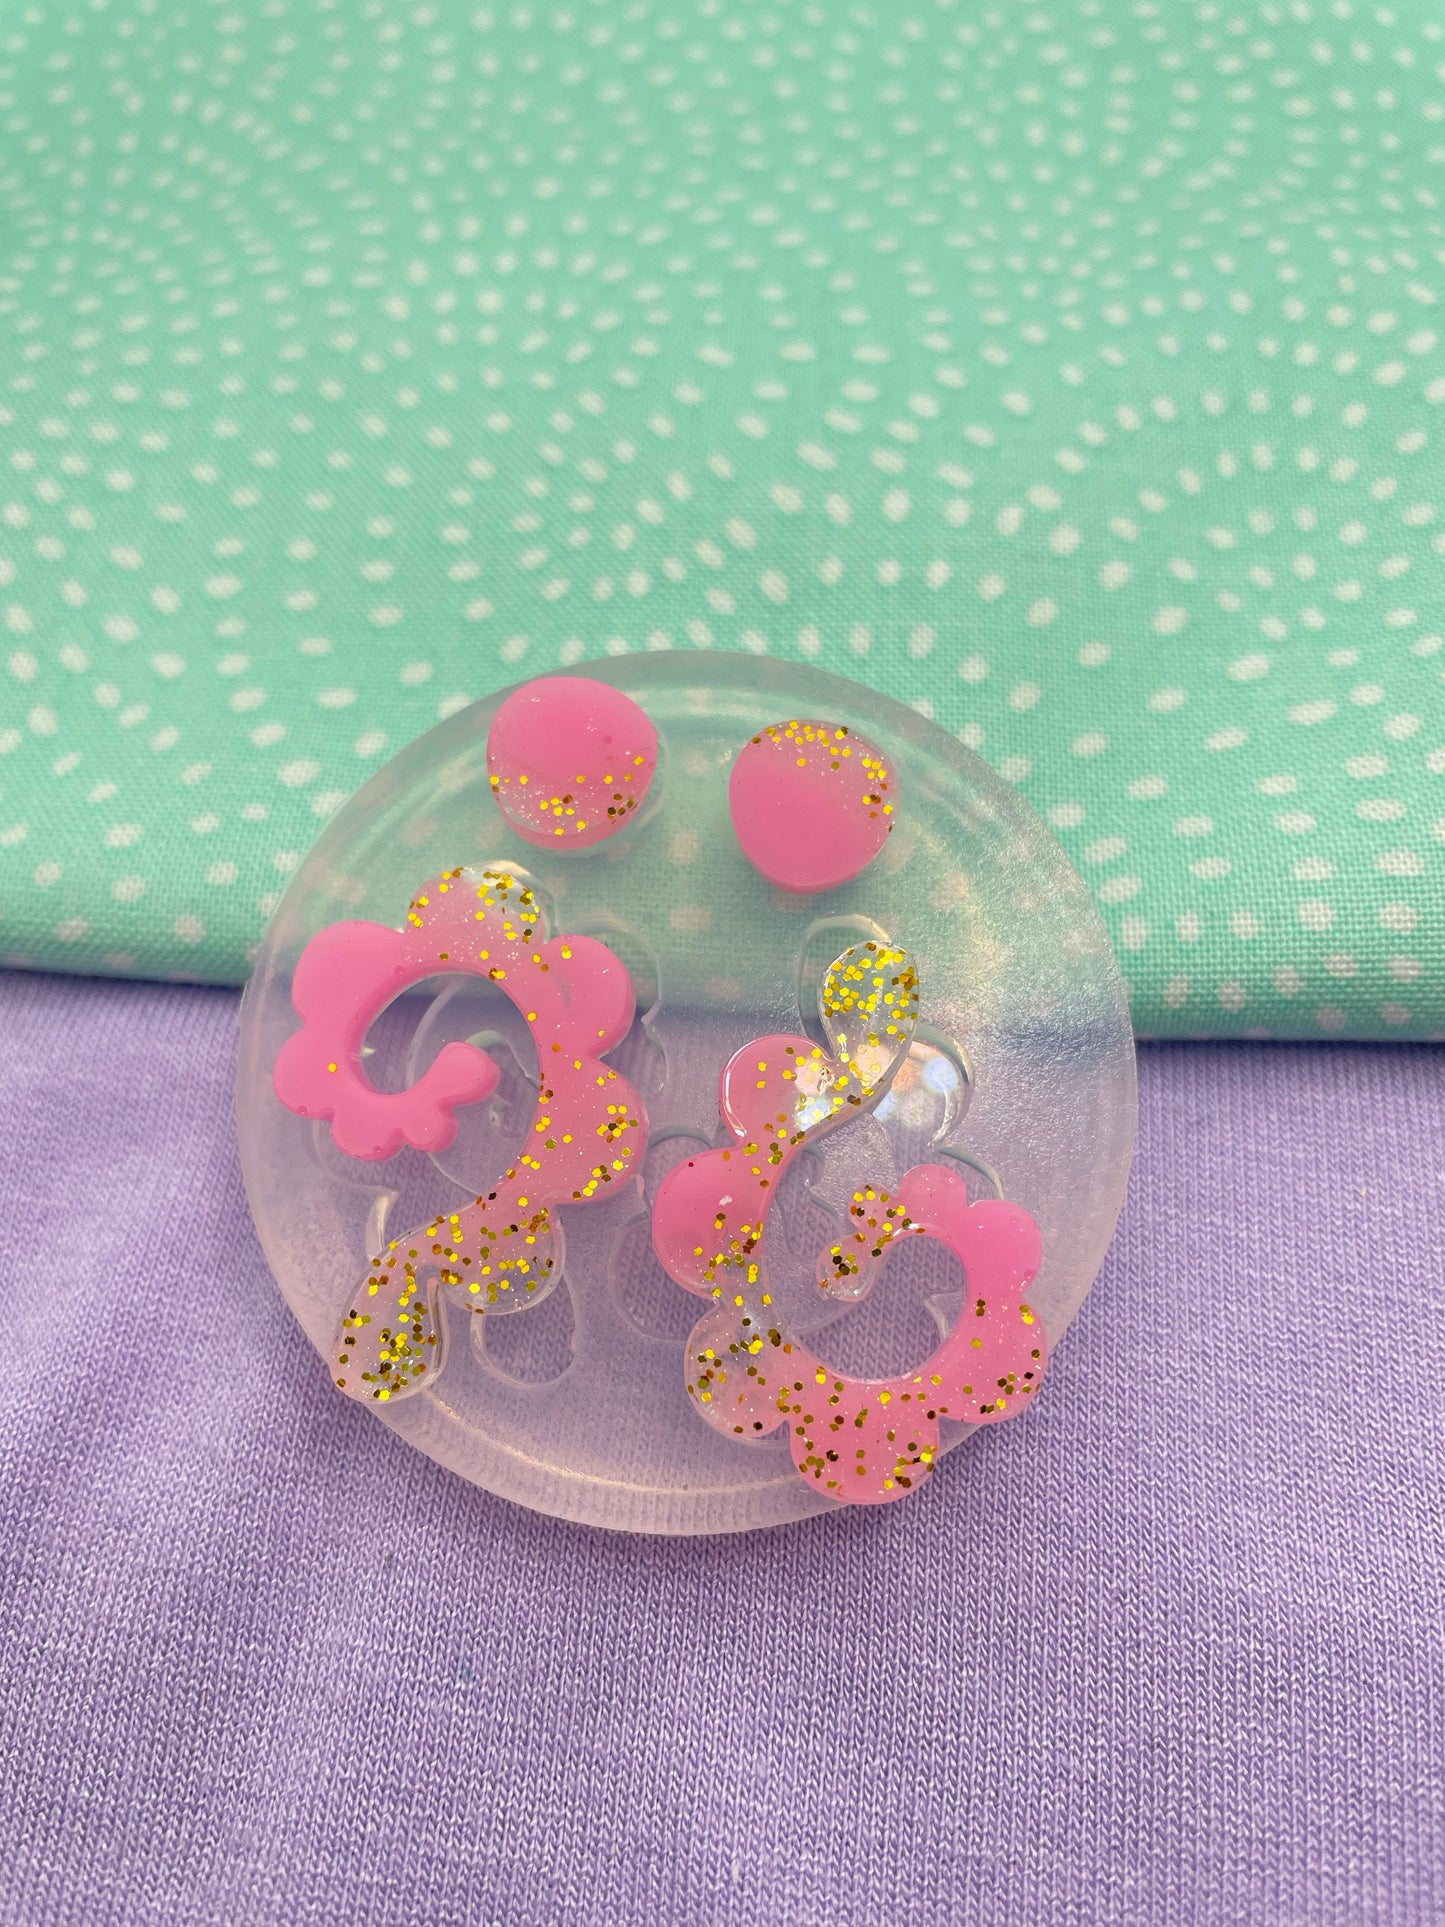 Matisse-inspired Spiral Algae Dangle/ Stud Earring Mould Silicone Mold